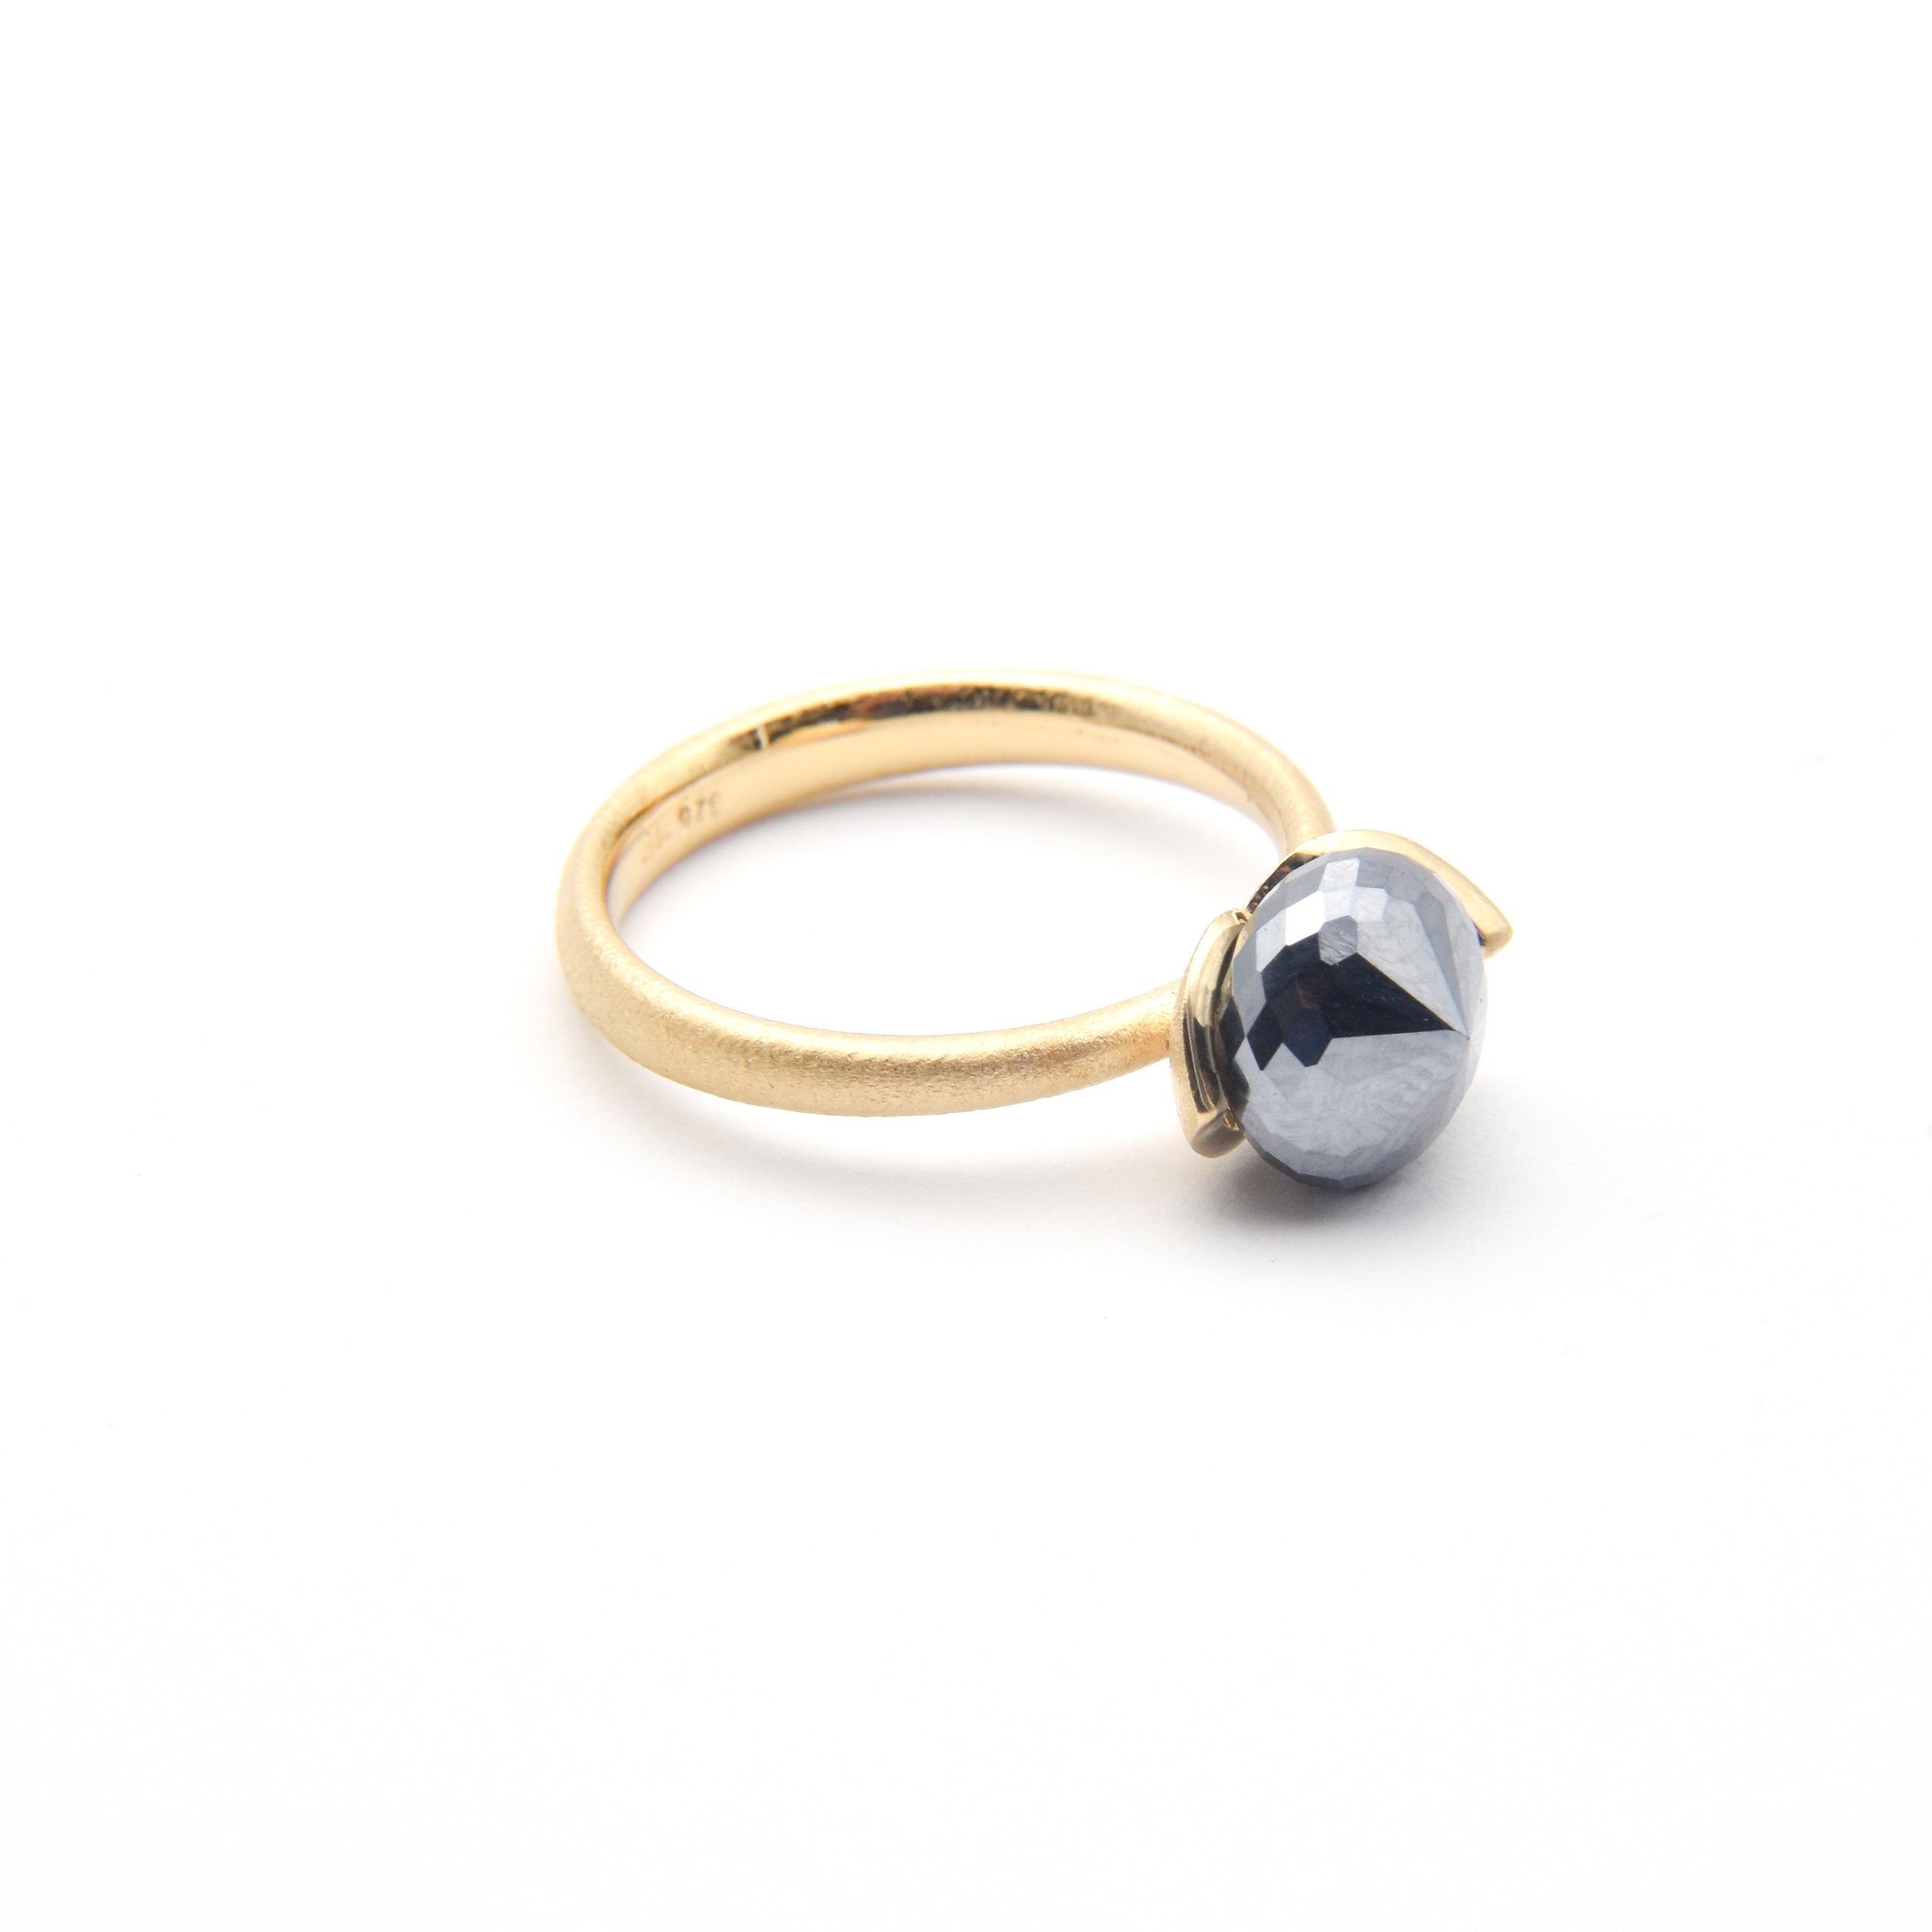 Dolce ring "smal" with hematite rec. 925/-